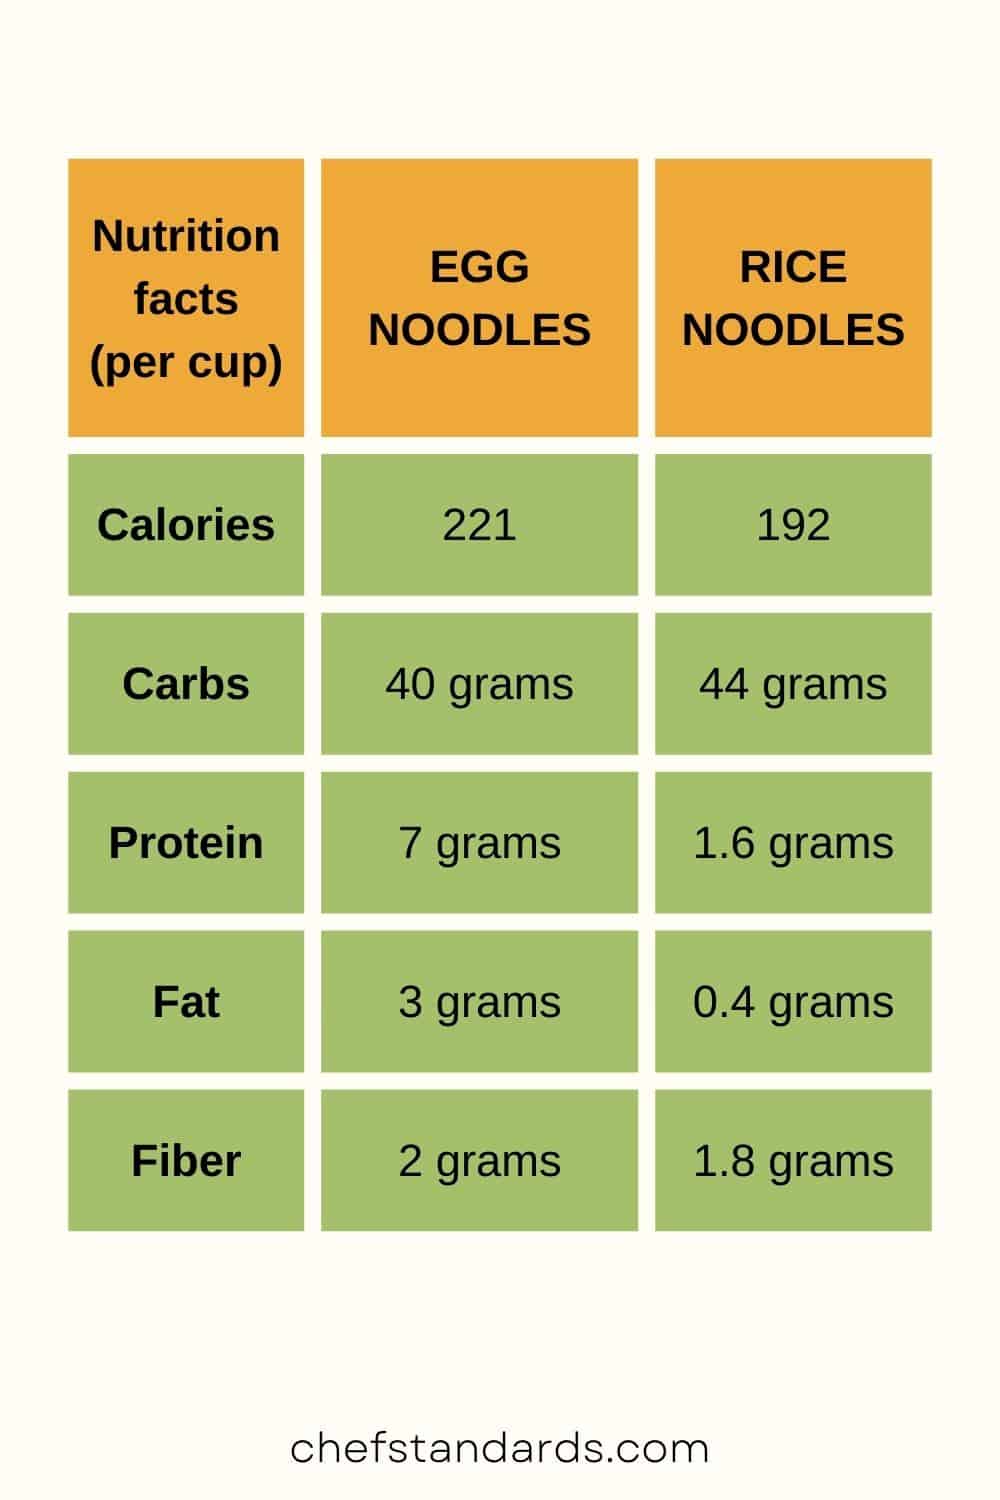 difference in nutritional value between egg noodles and rice noodles